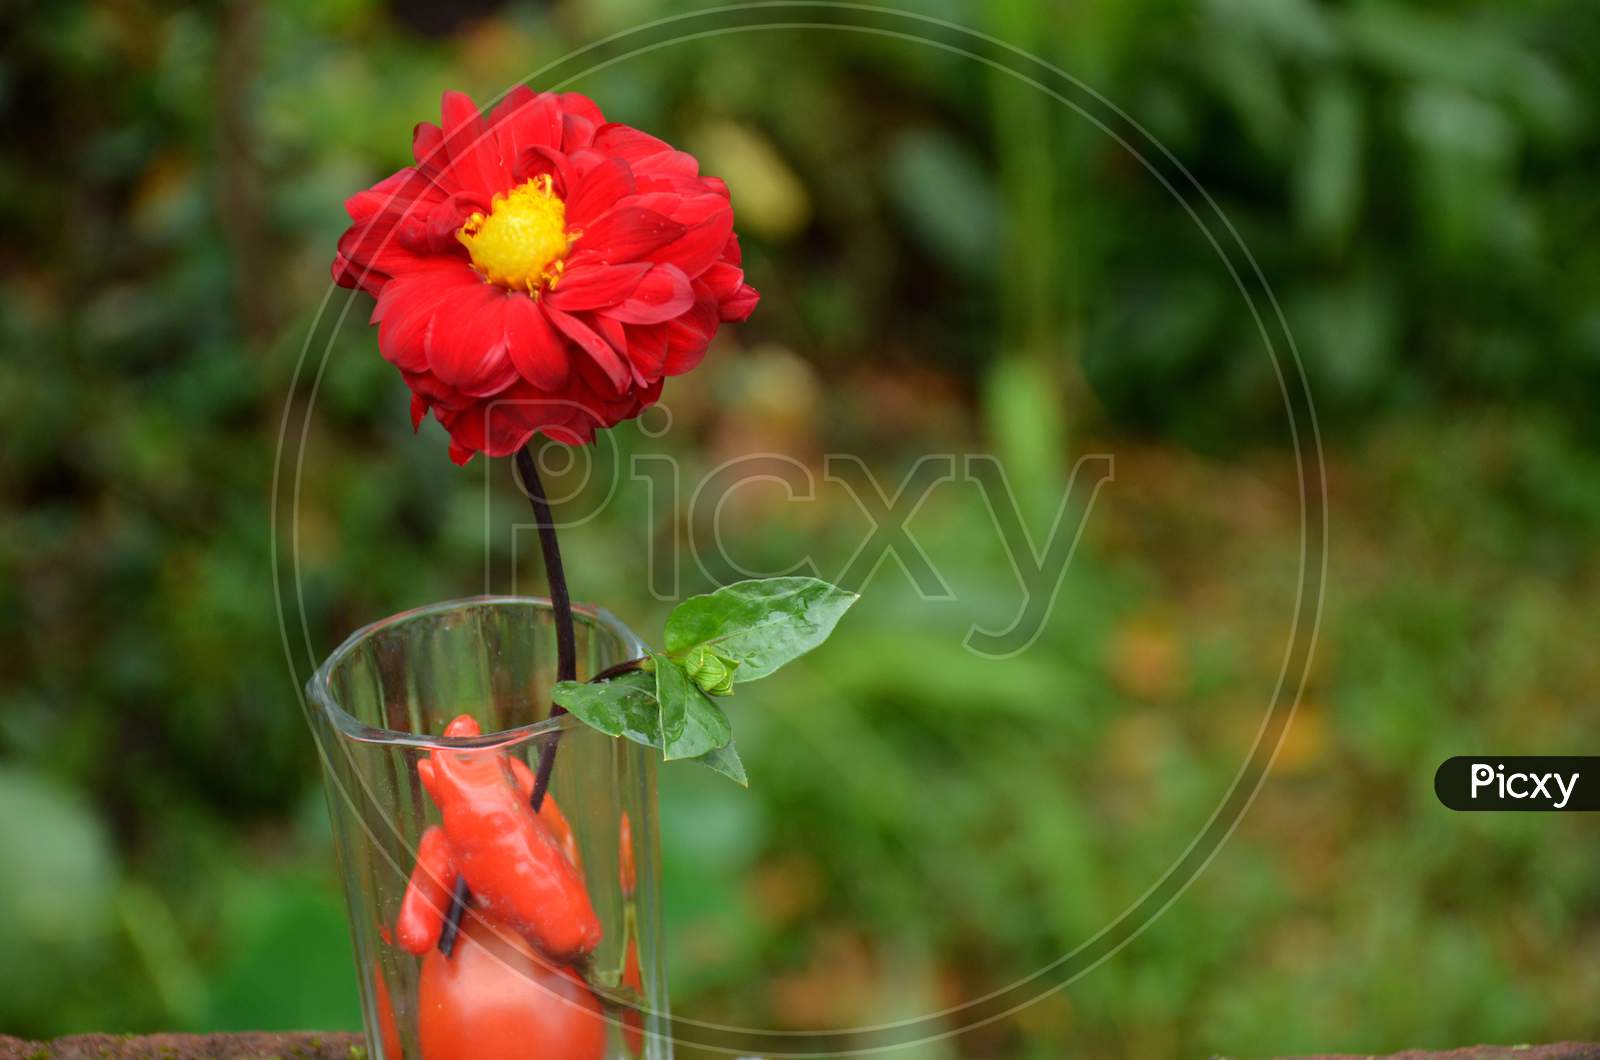 The Beautiful Red Dahlia Flower With Leaf In The Glass On The Green Background.